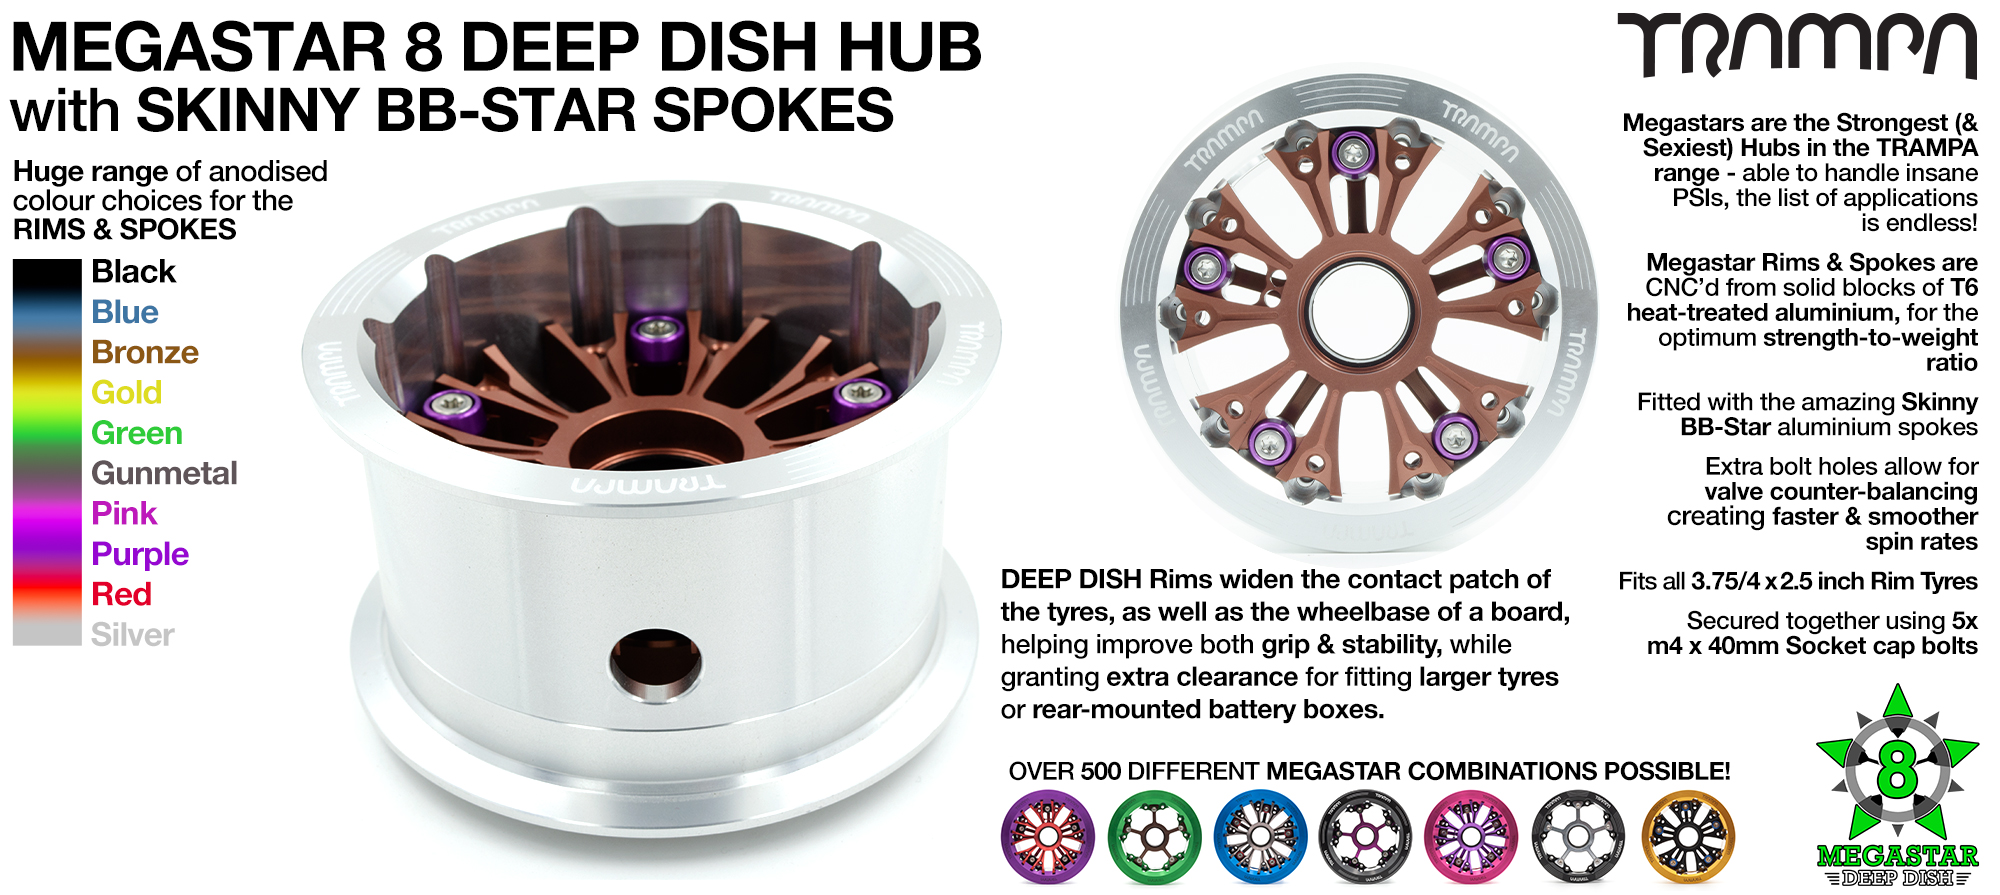 Deep-Dish MEGASTAR 8 with CLASSIC 5 Spokes 3.75 x 2.5 Inch - Fits Pneumatic tyres up to 8 Inches in outer diameter 